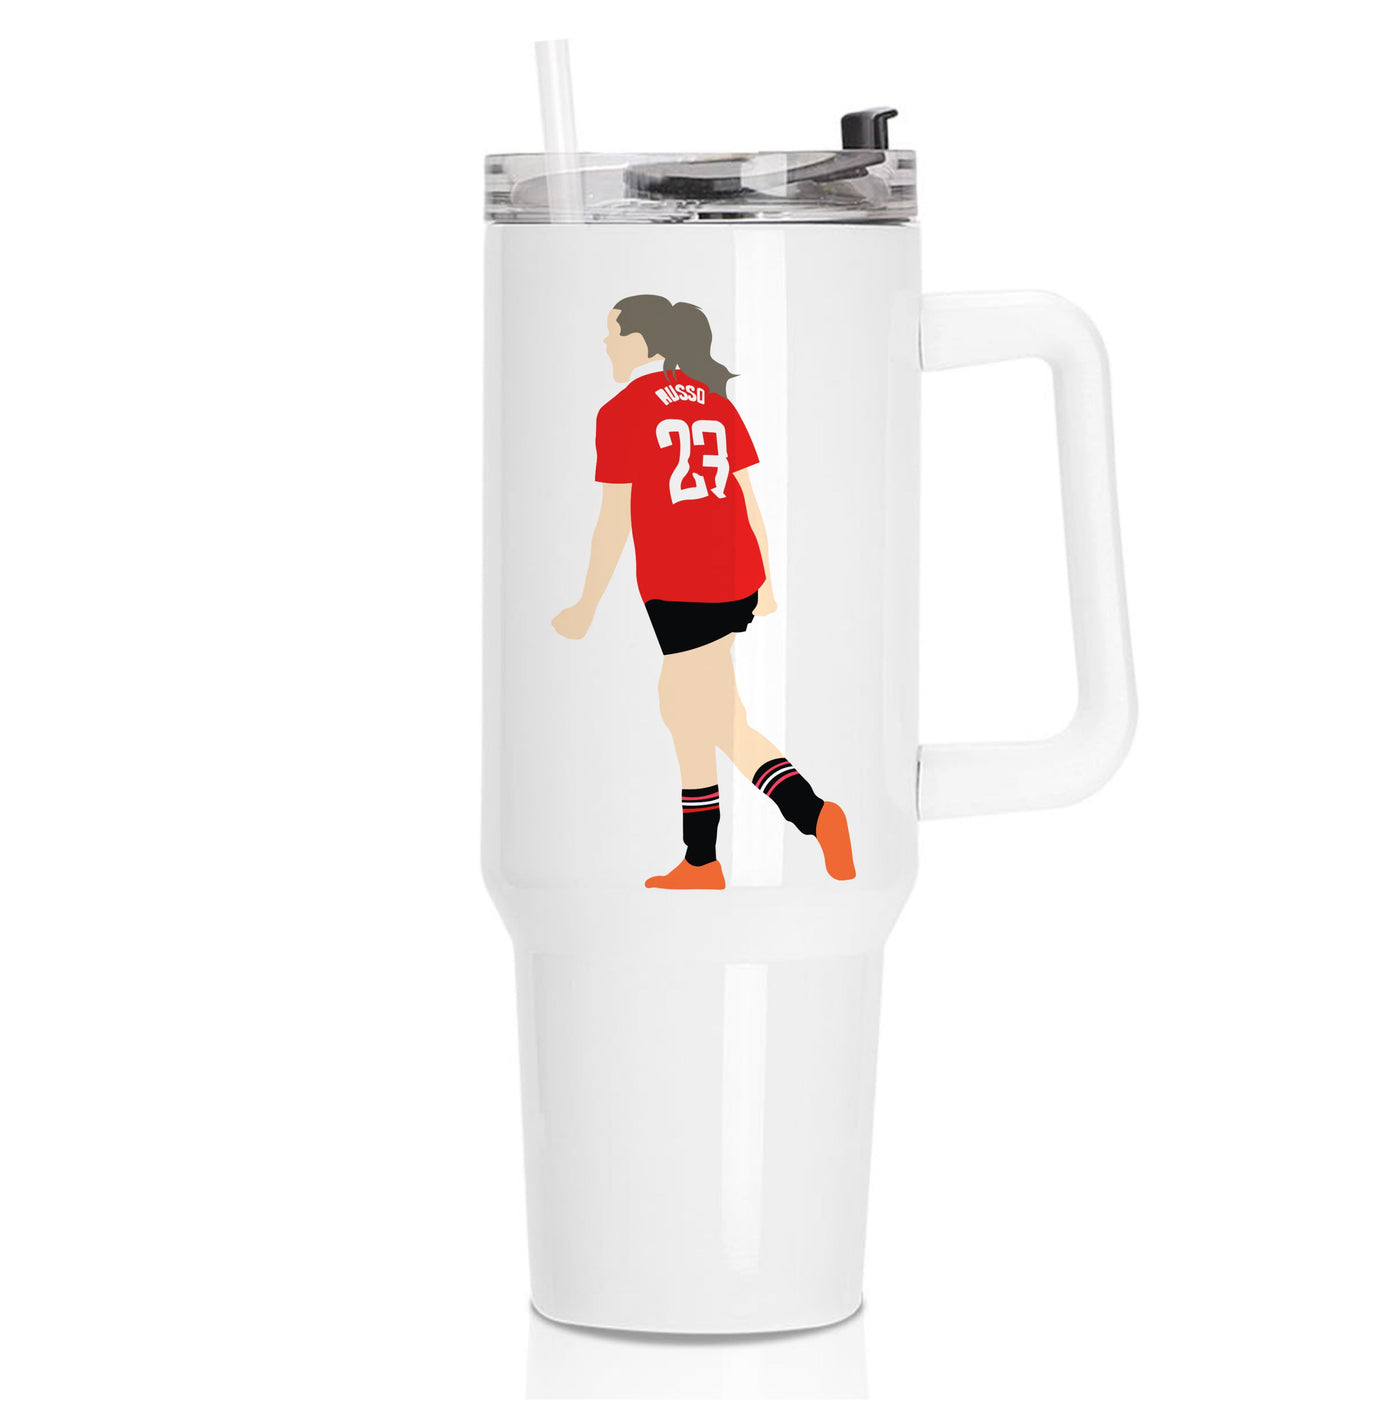 Alessia Russo - Womens World Cup Tumbler